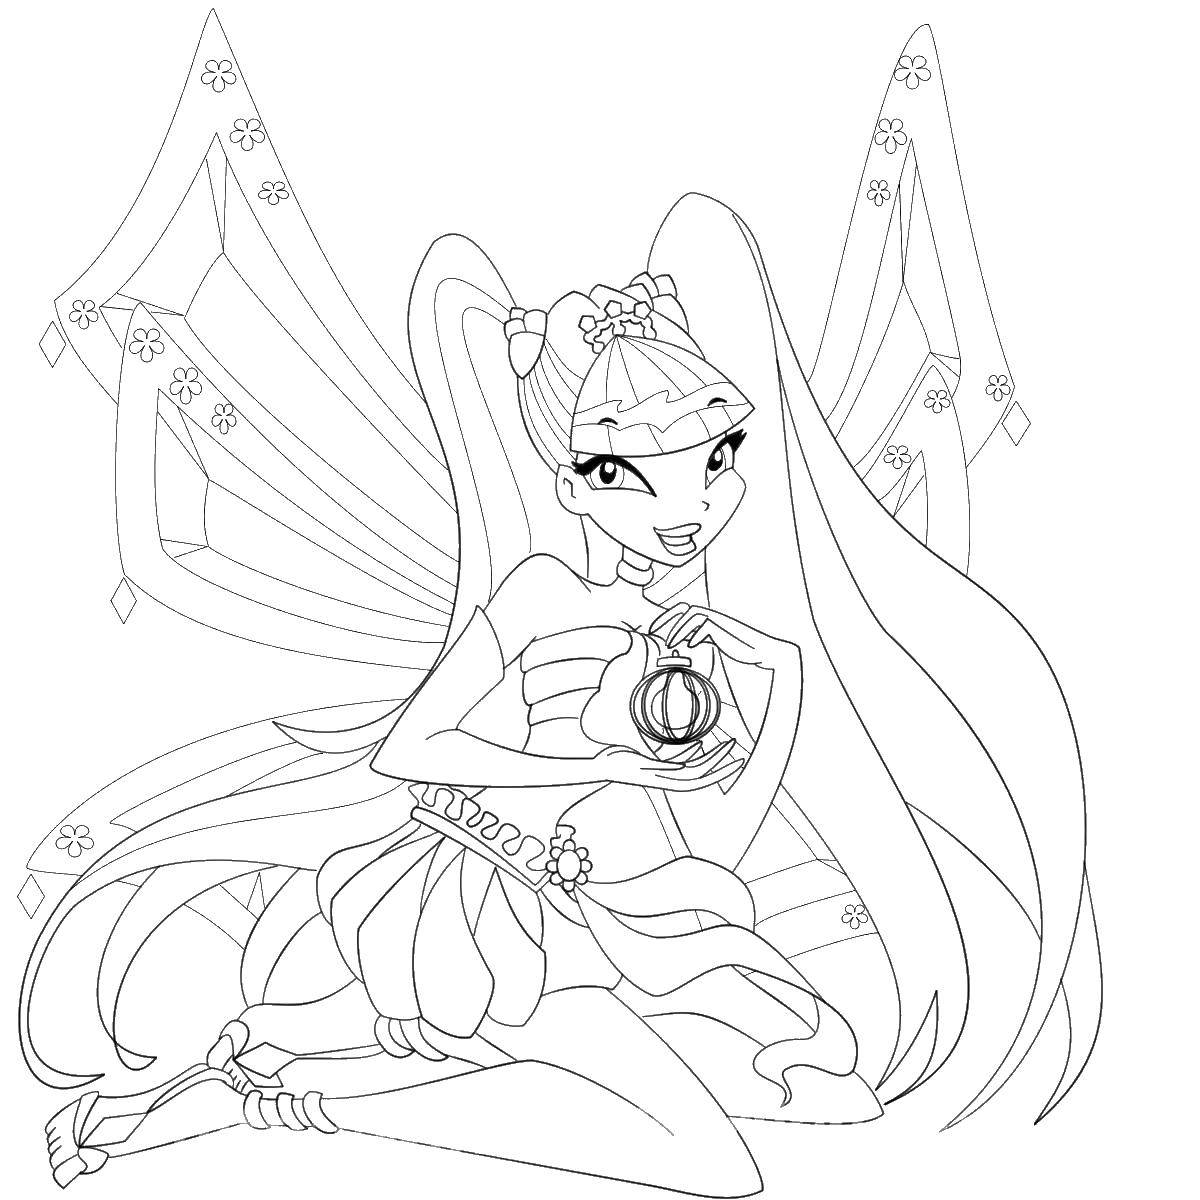 Coloring Muse with bluecam. Category Winx. Tags:  Musa, Winx, Fairy.